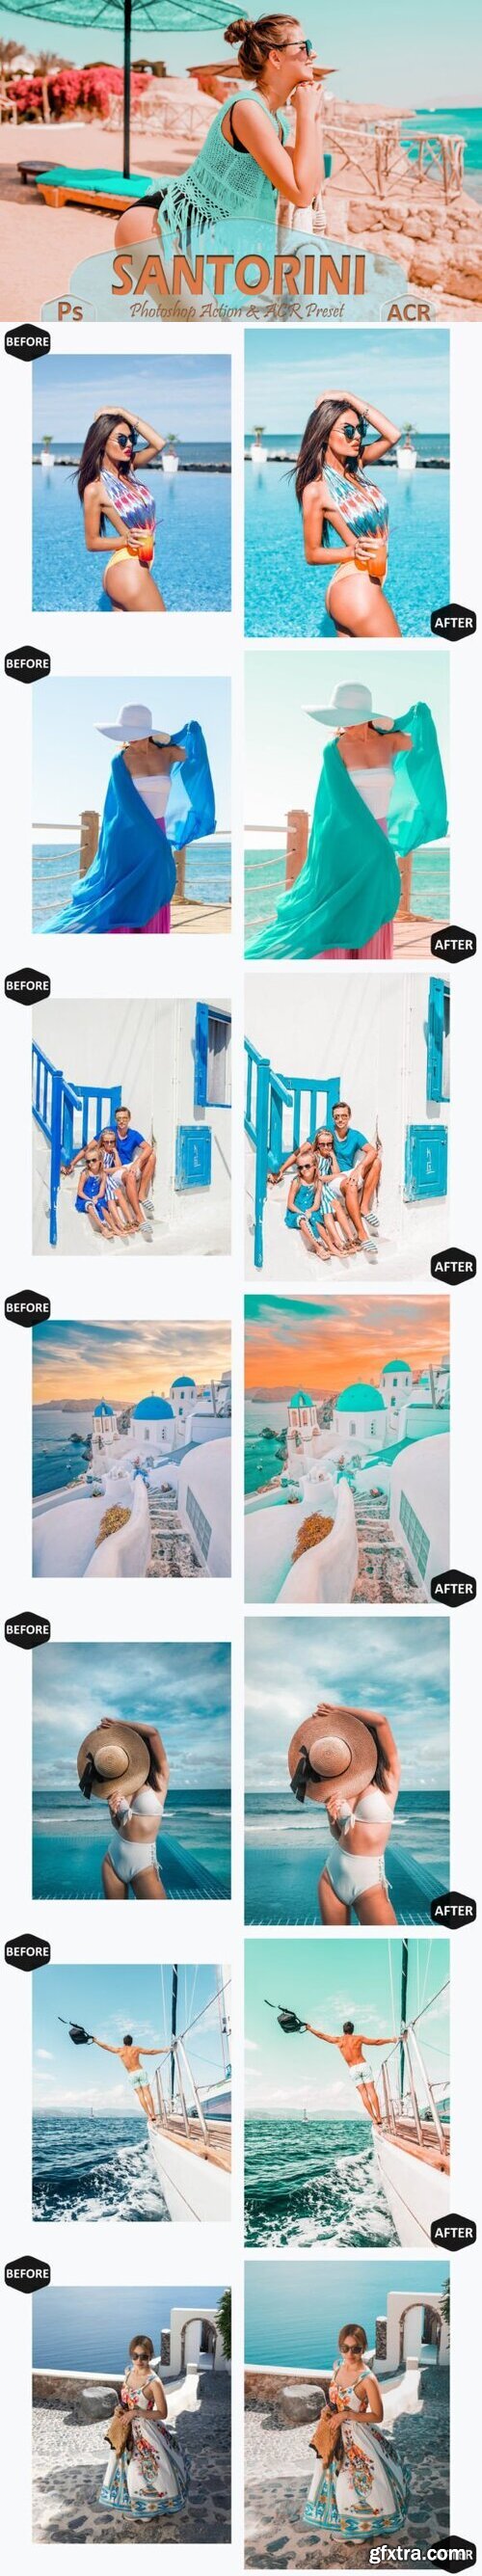 10 Santorini Photoshop Actions and ACR